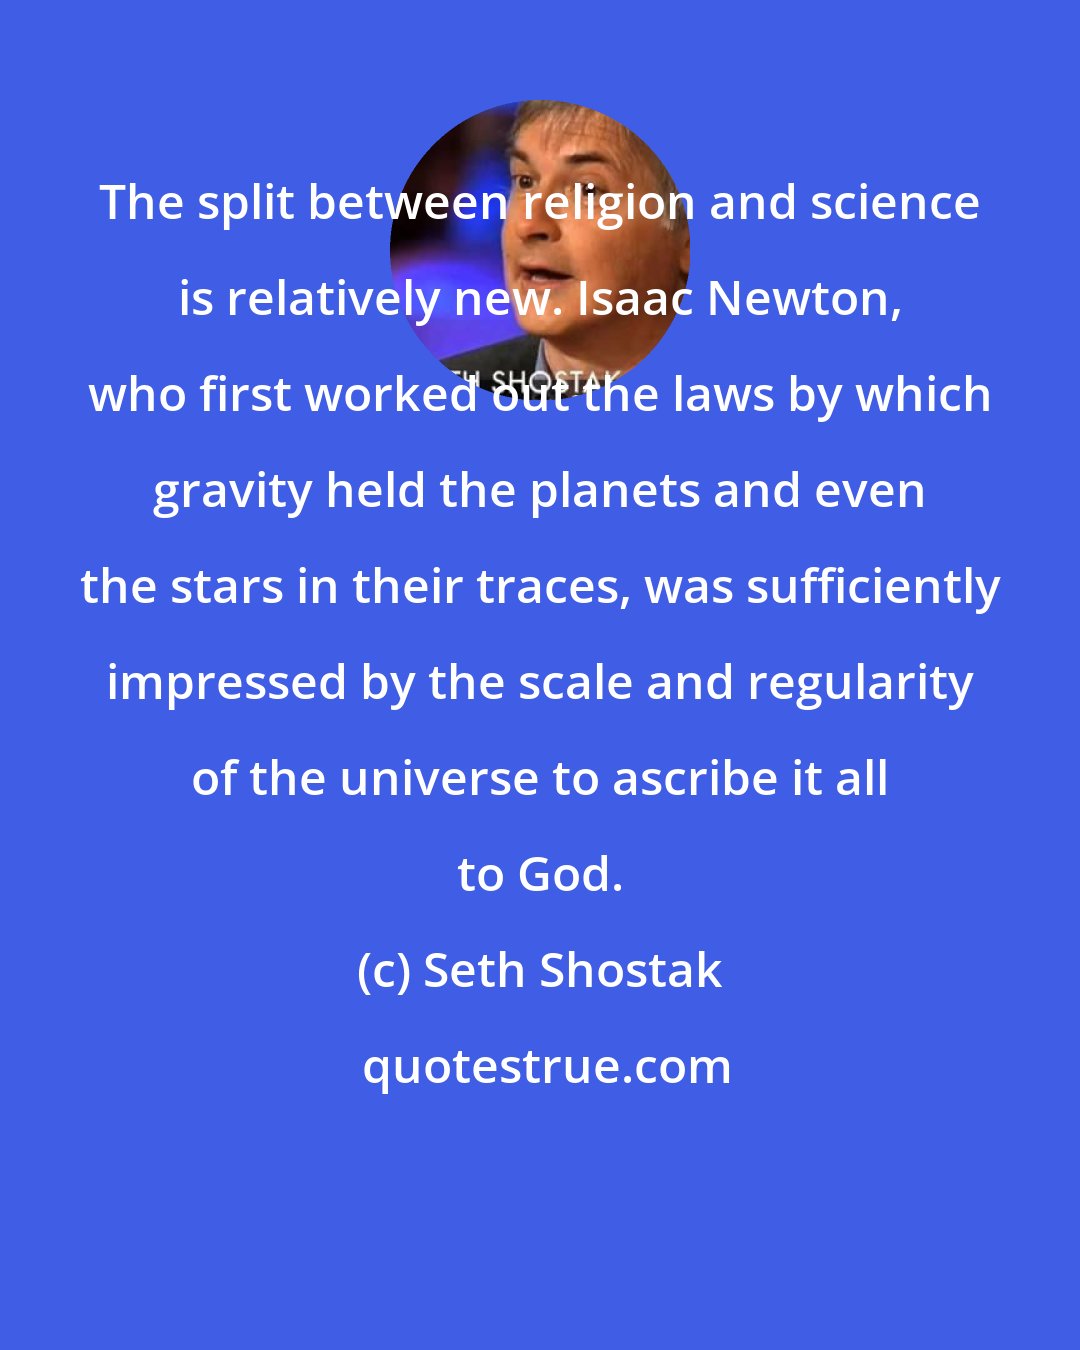 Seth Shostak: The split between religion and science is relatively new. Isaac Newton, who first worked out the laws by which gravity held the planets and even the stars in their traces, was sufficiently impressed by the scale and regularity of the universe to ascribe it all to God.